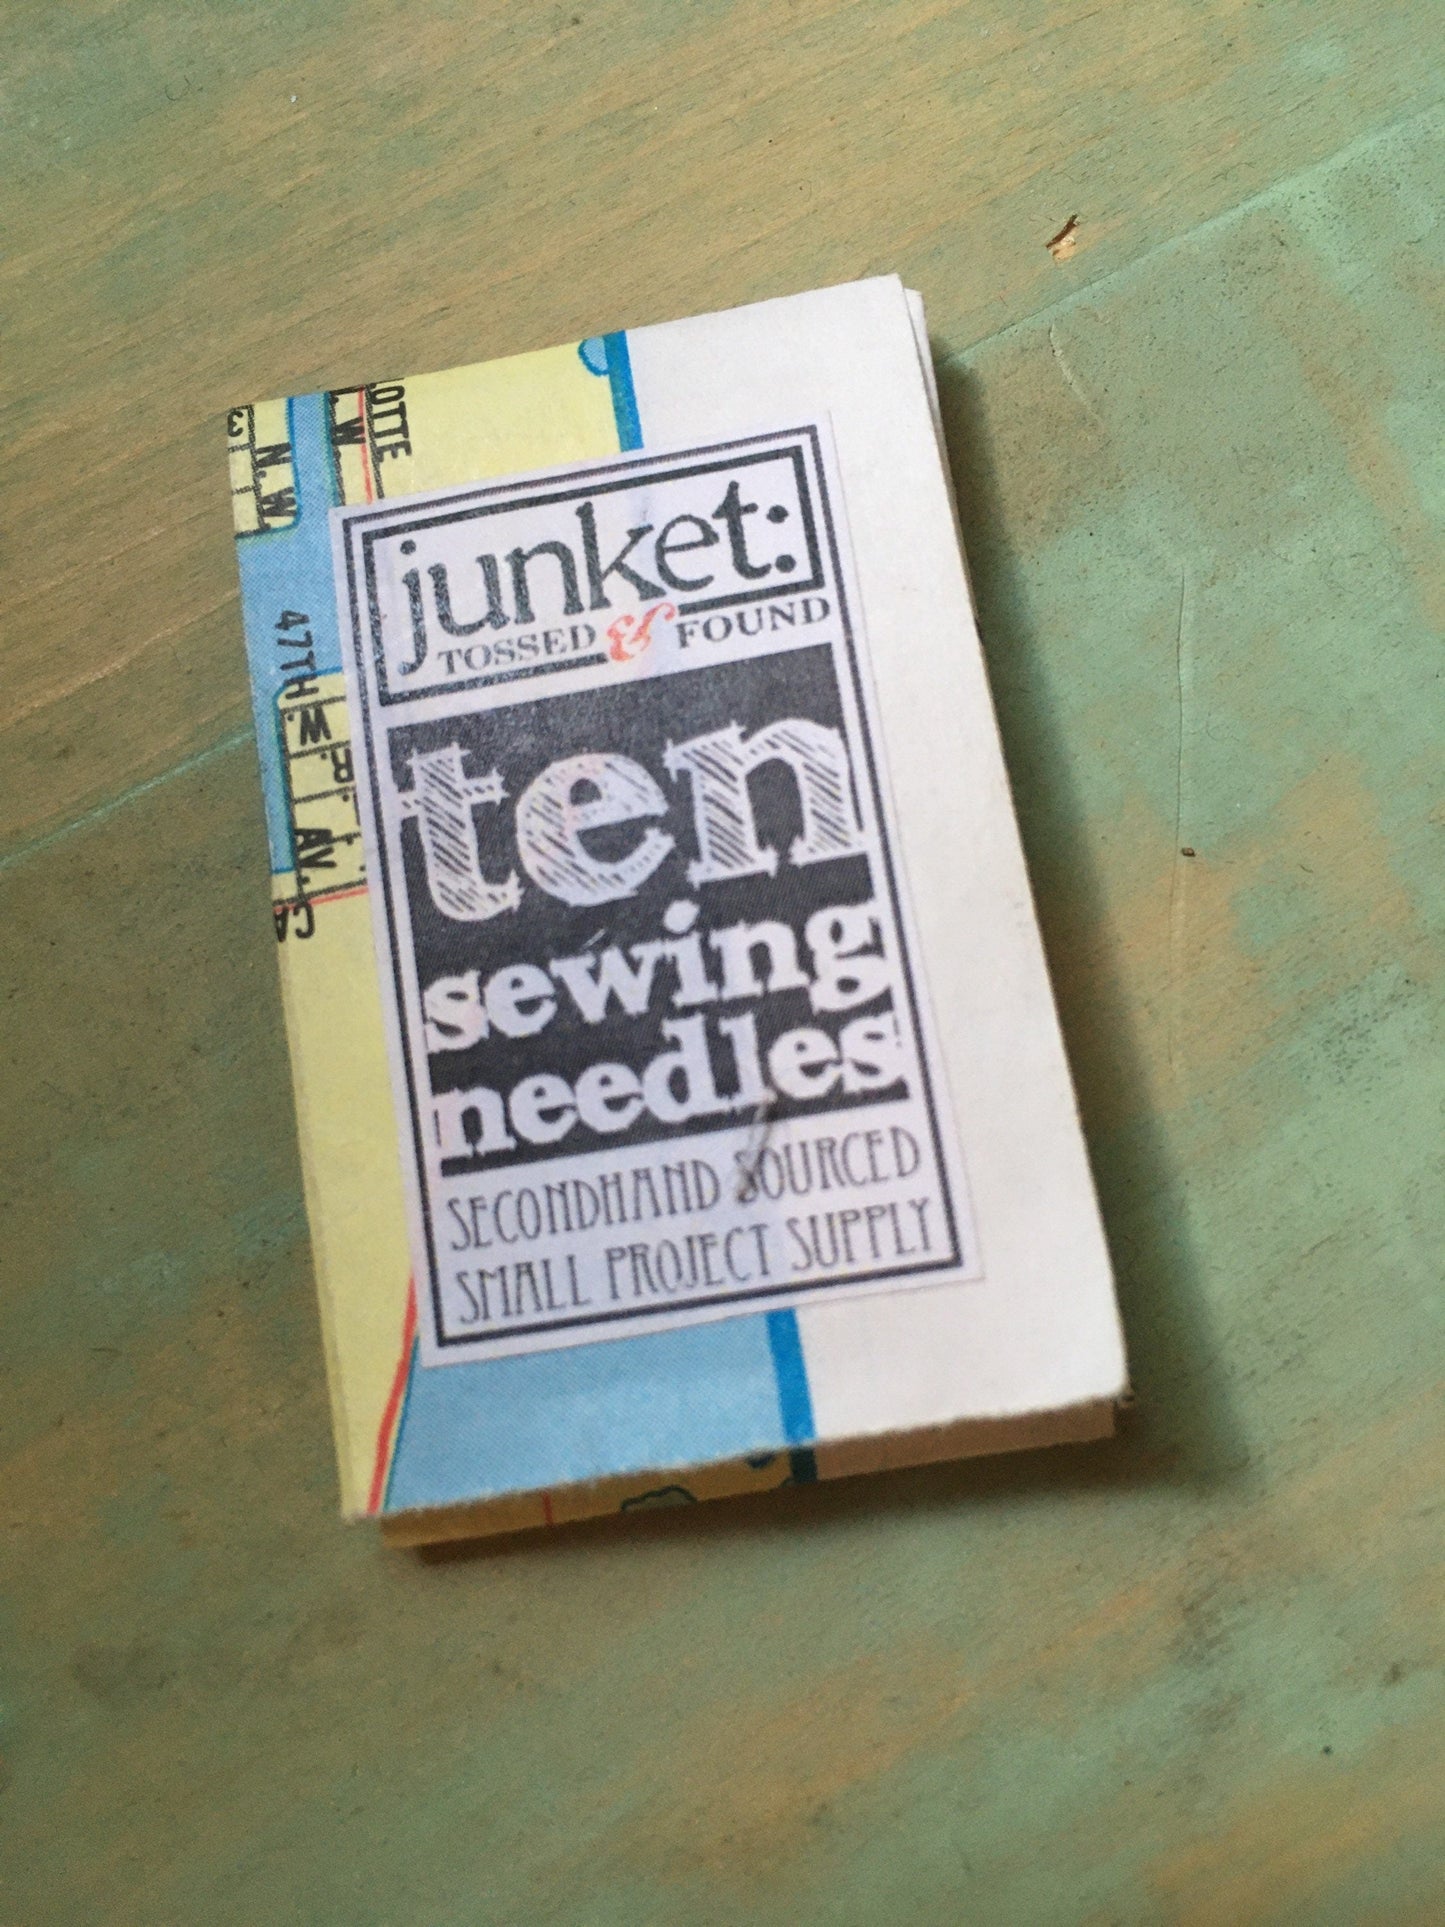 Ten hand-sewing needles - variety pack